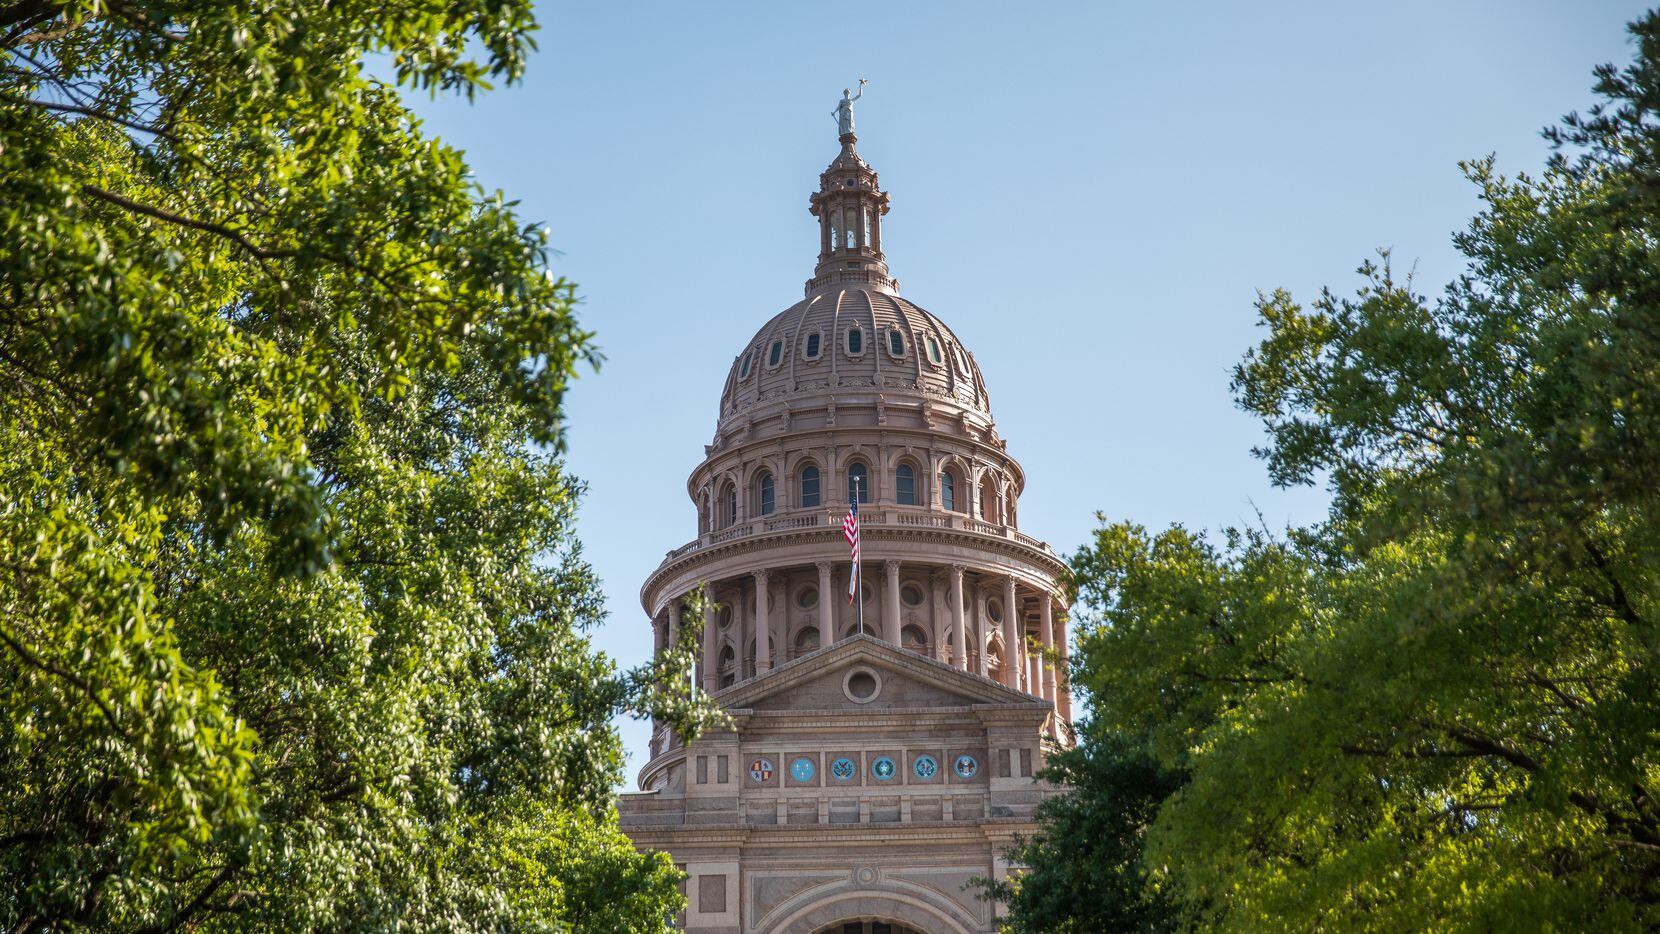 The Texas state capitol building in Austin.